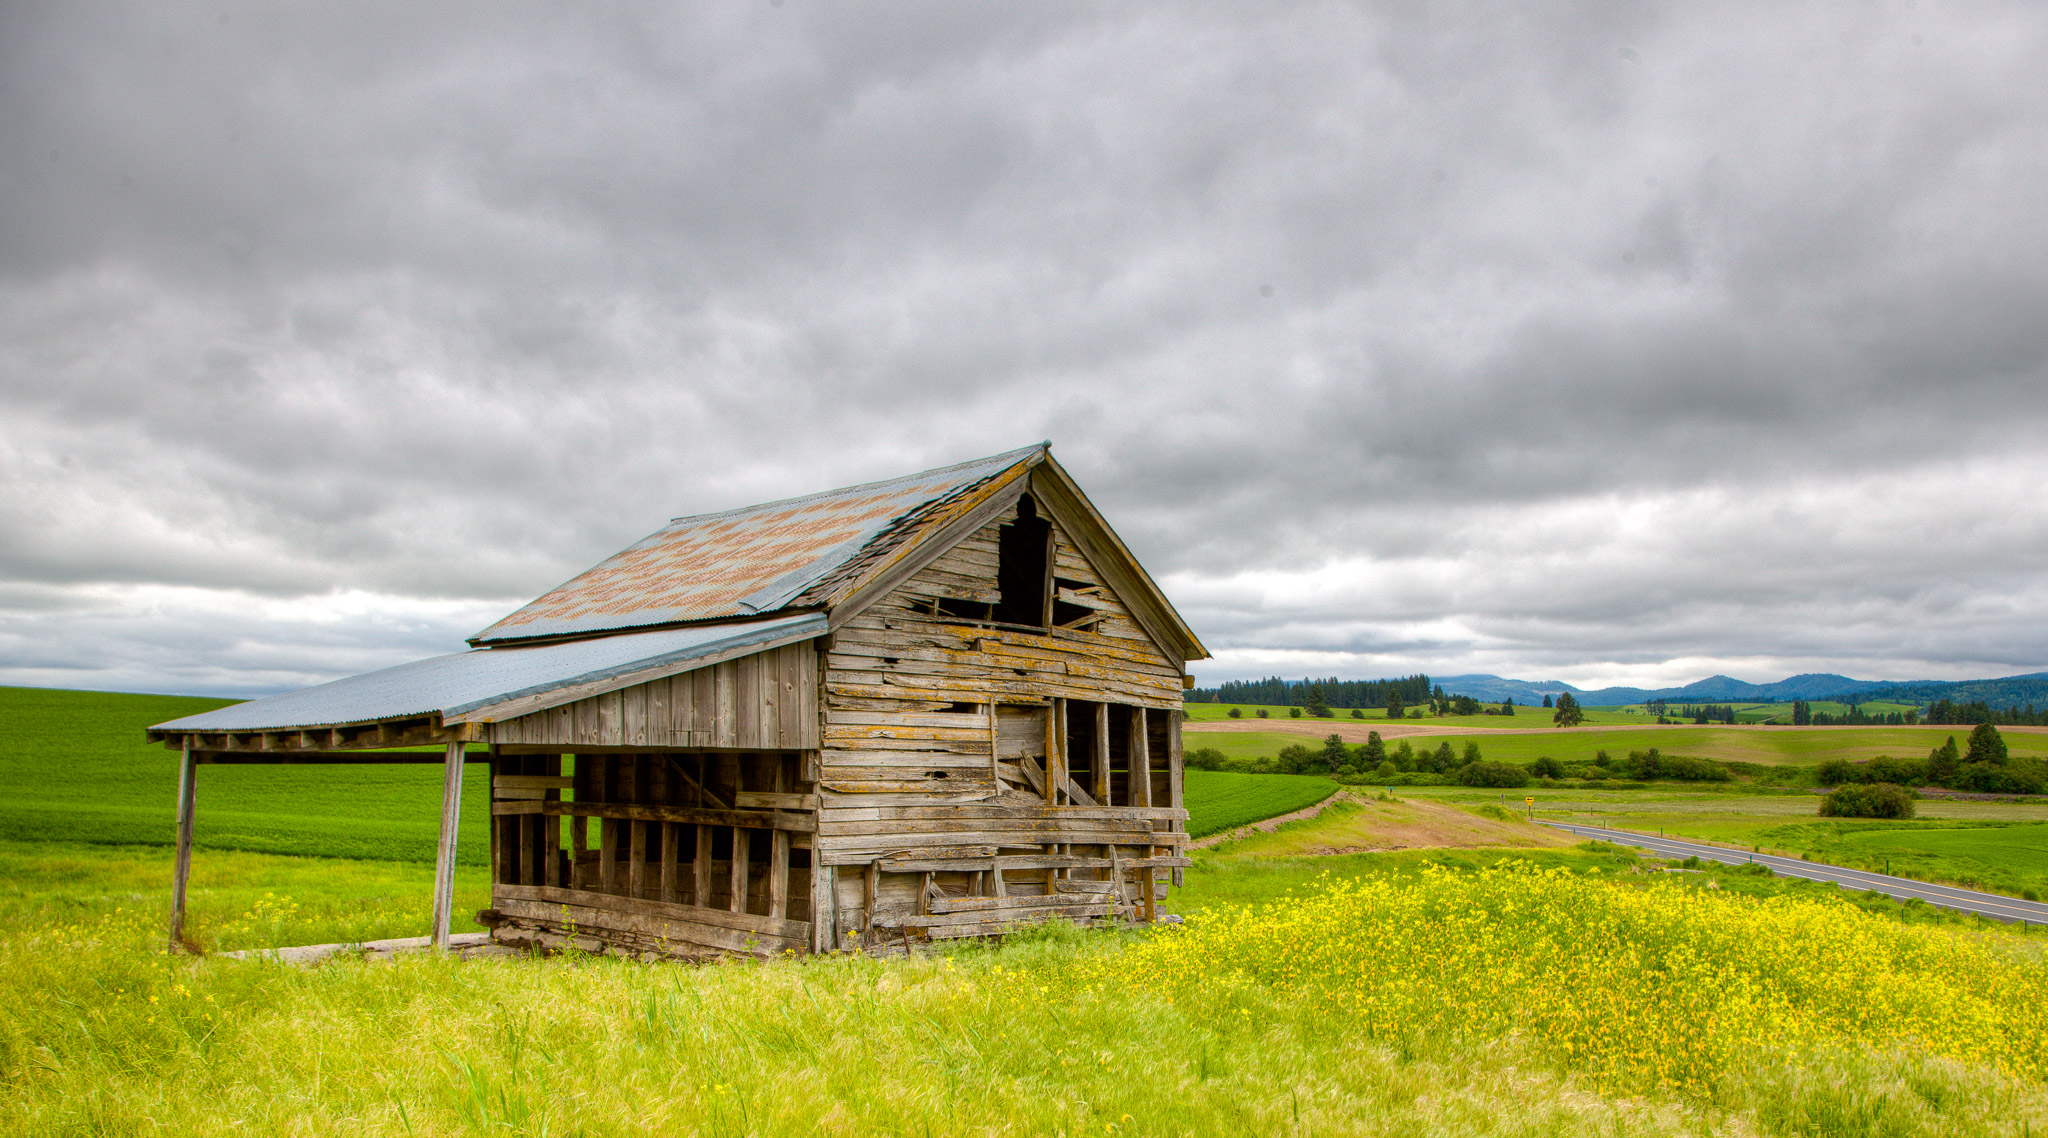 Derelict shed between Palouse & Potlatch